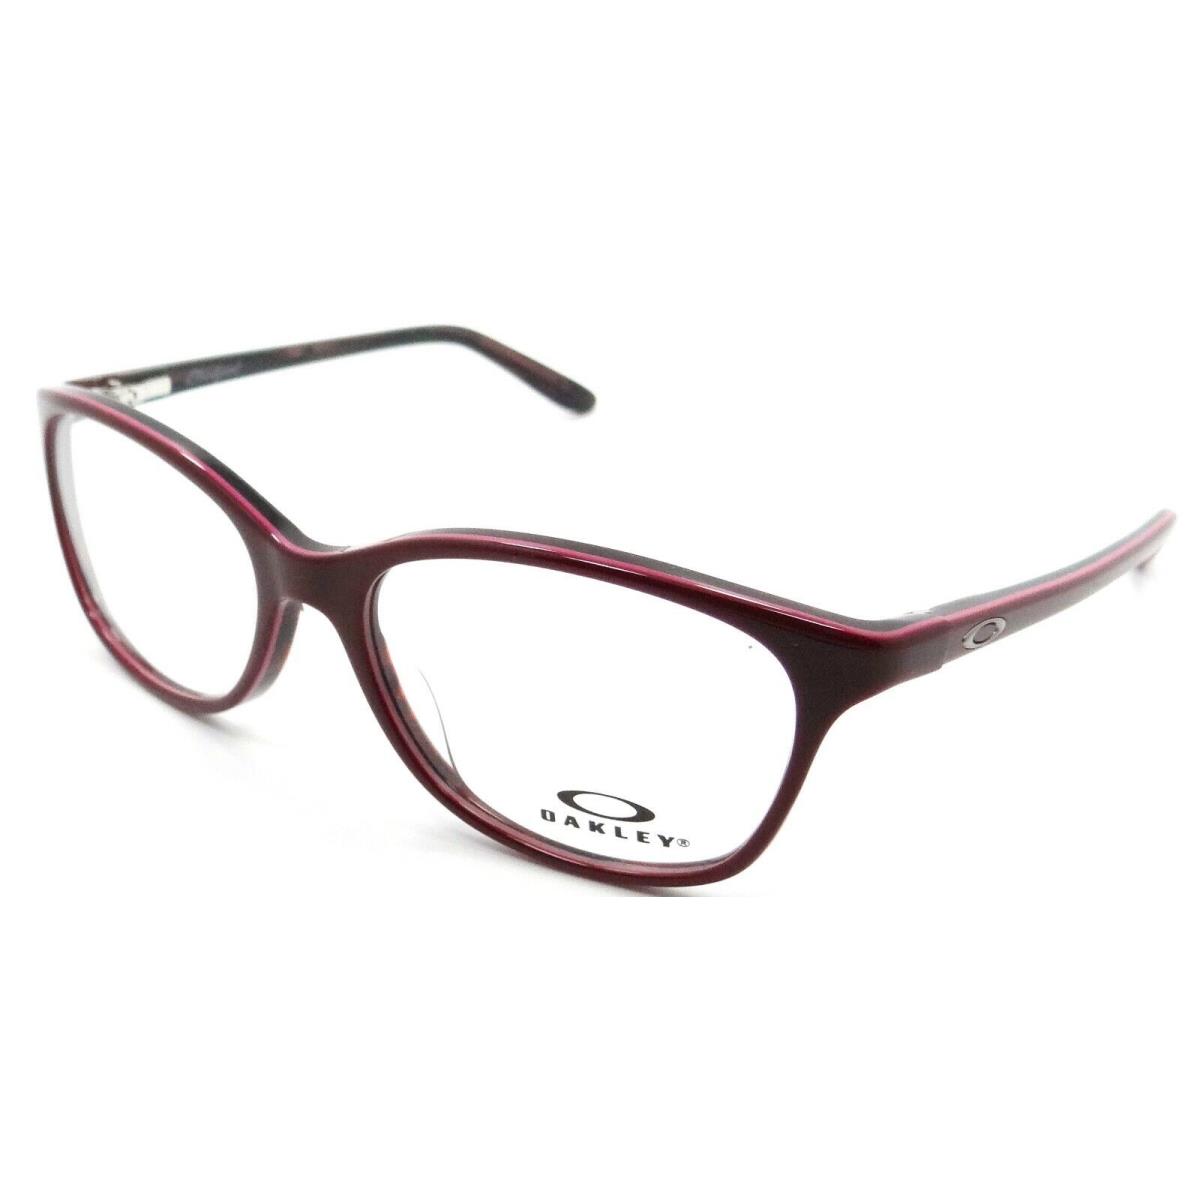 Oakley Rx Eyeglasses Frames OX1131-0552 52-16-136 Standpoint Banded Red